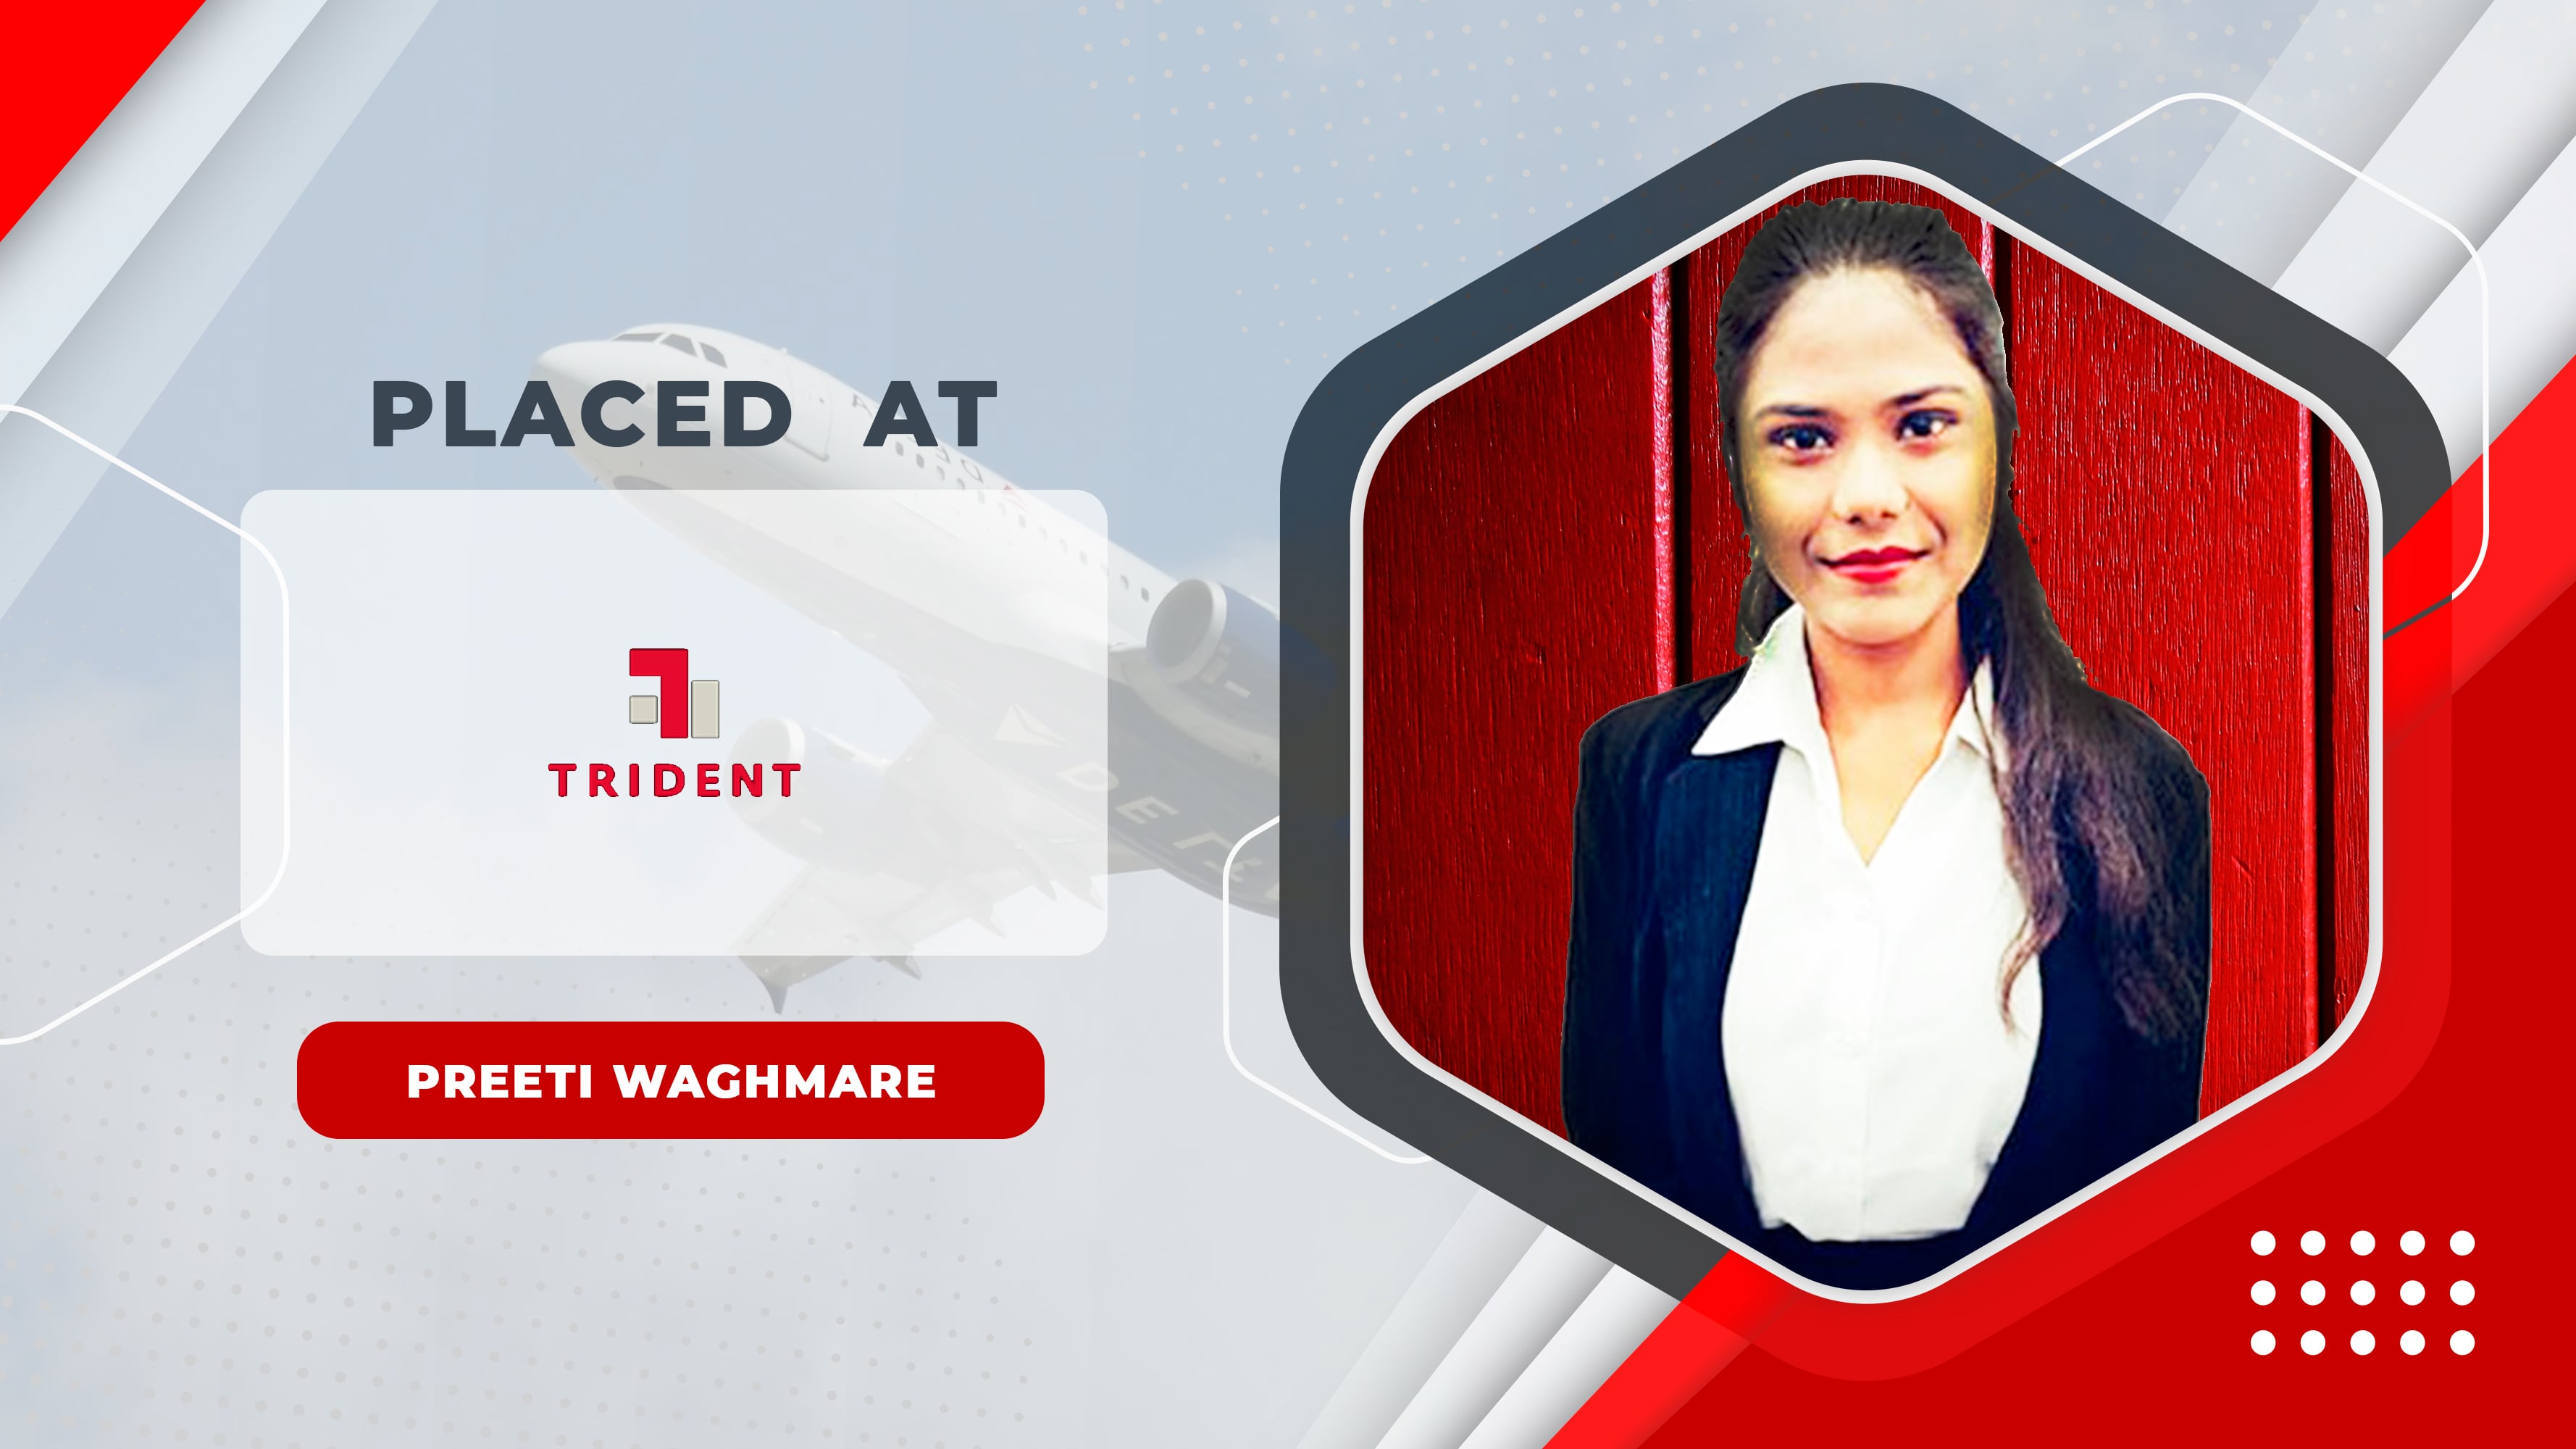 Trident - preeti wStudents placed by Amigo Academy - Pritiaghmare